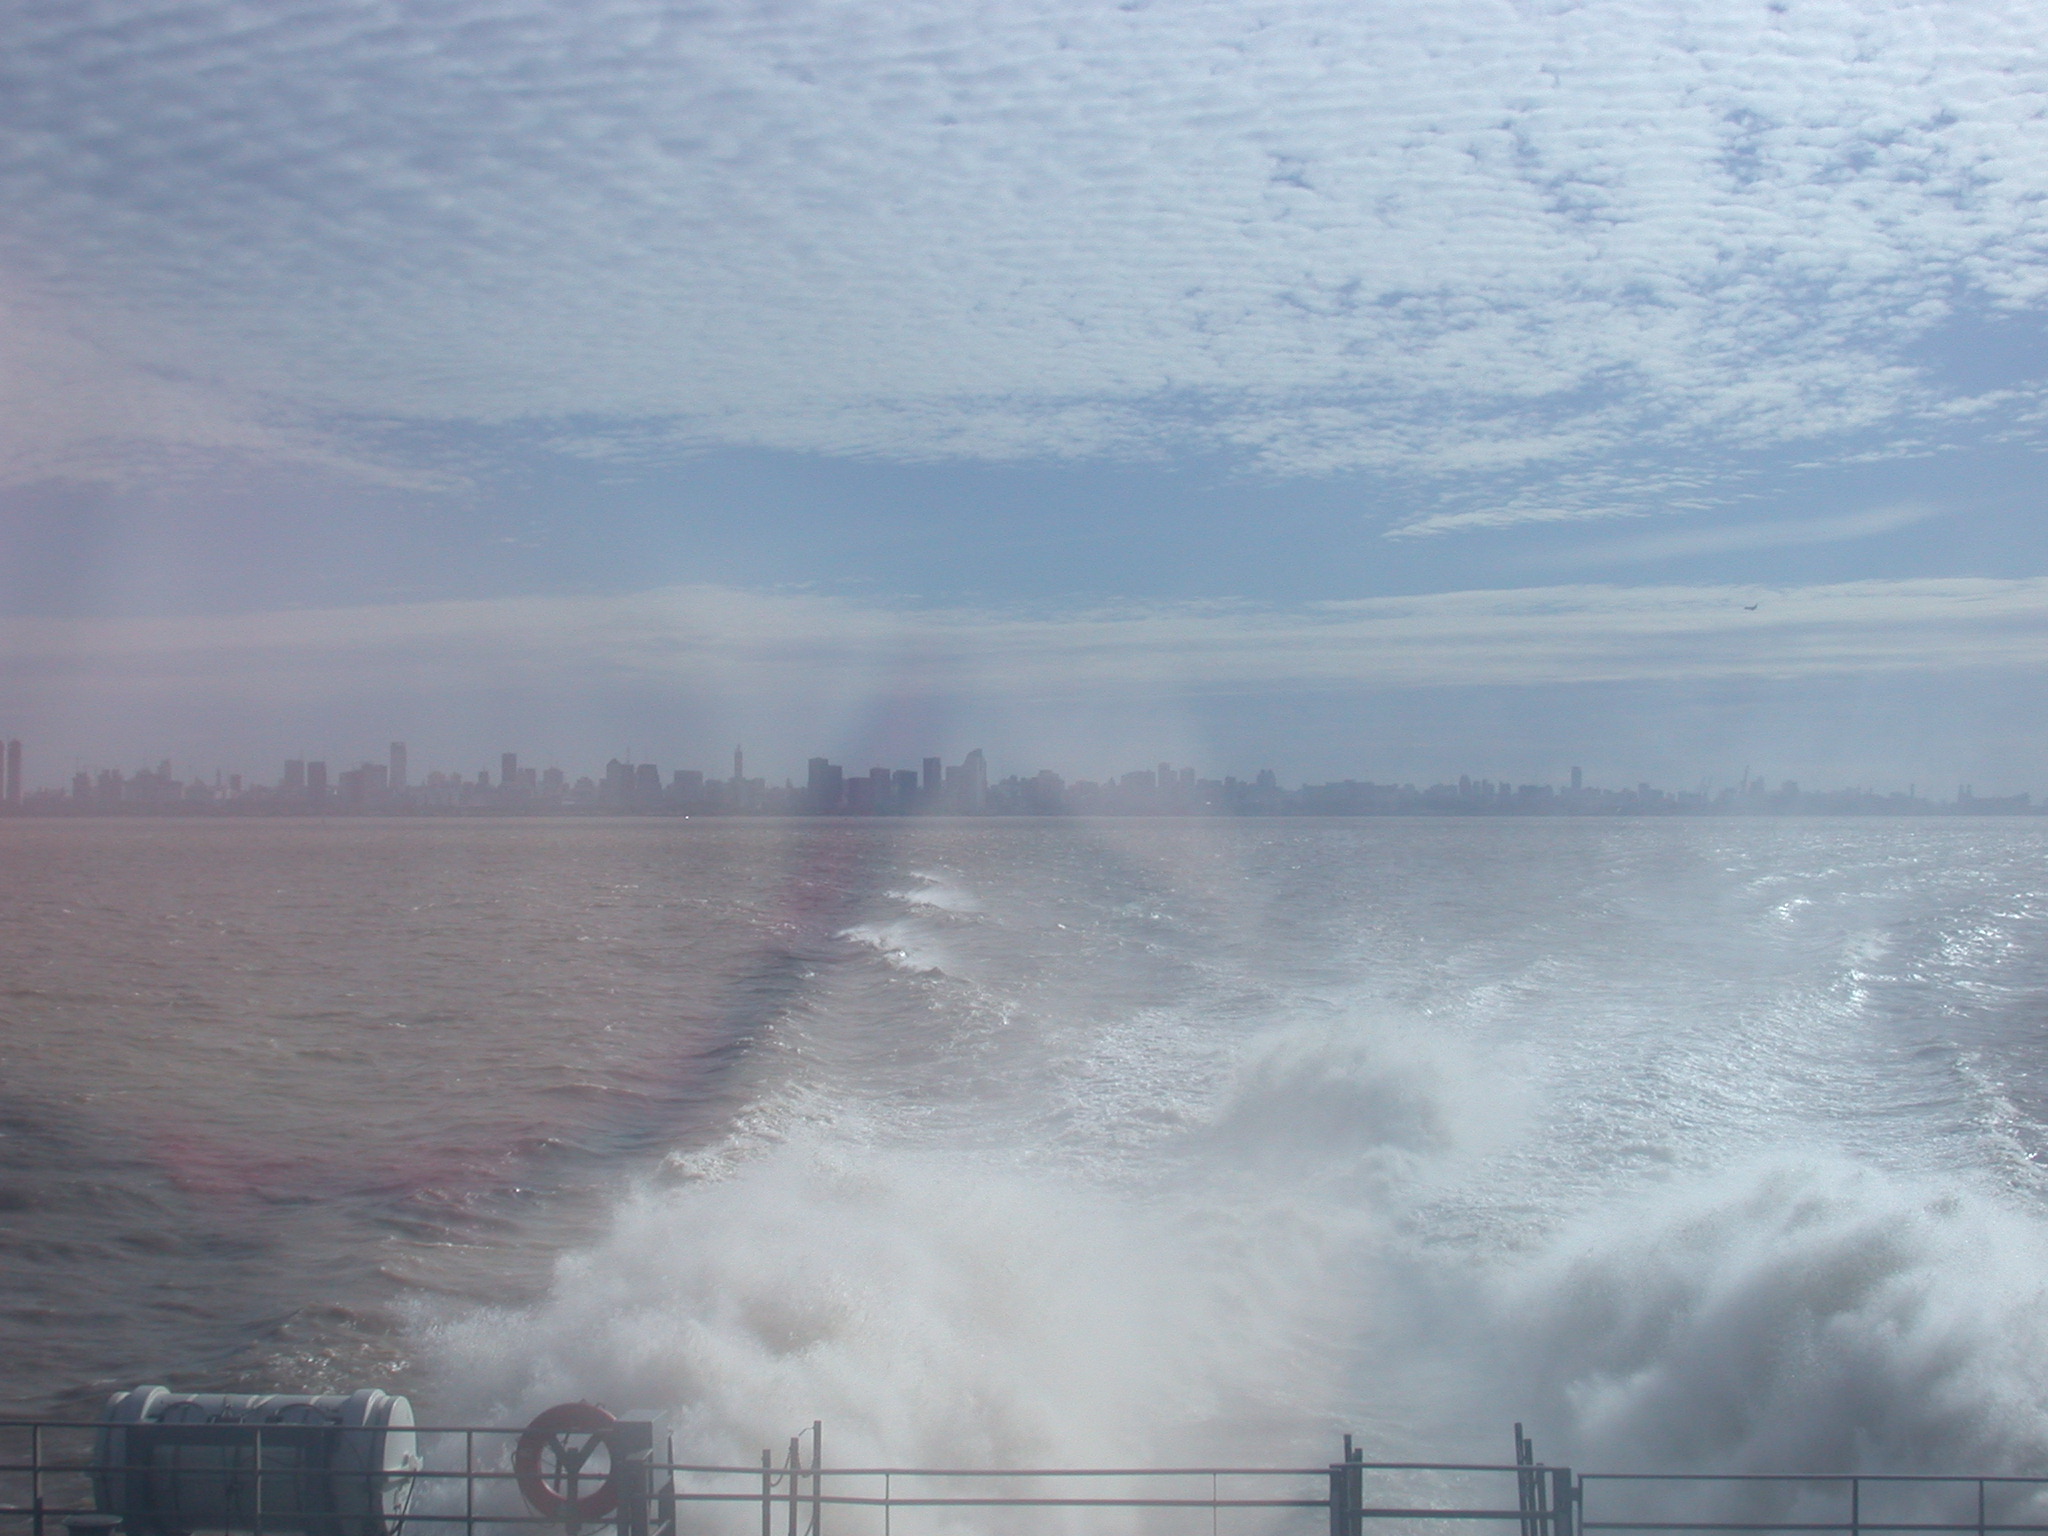 Ferry from Buenos Aires, Argentina, to Montevideo, Uruguay